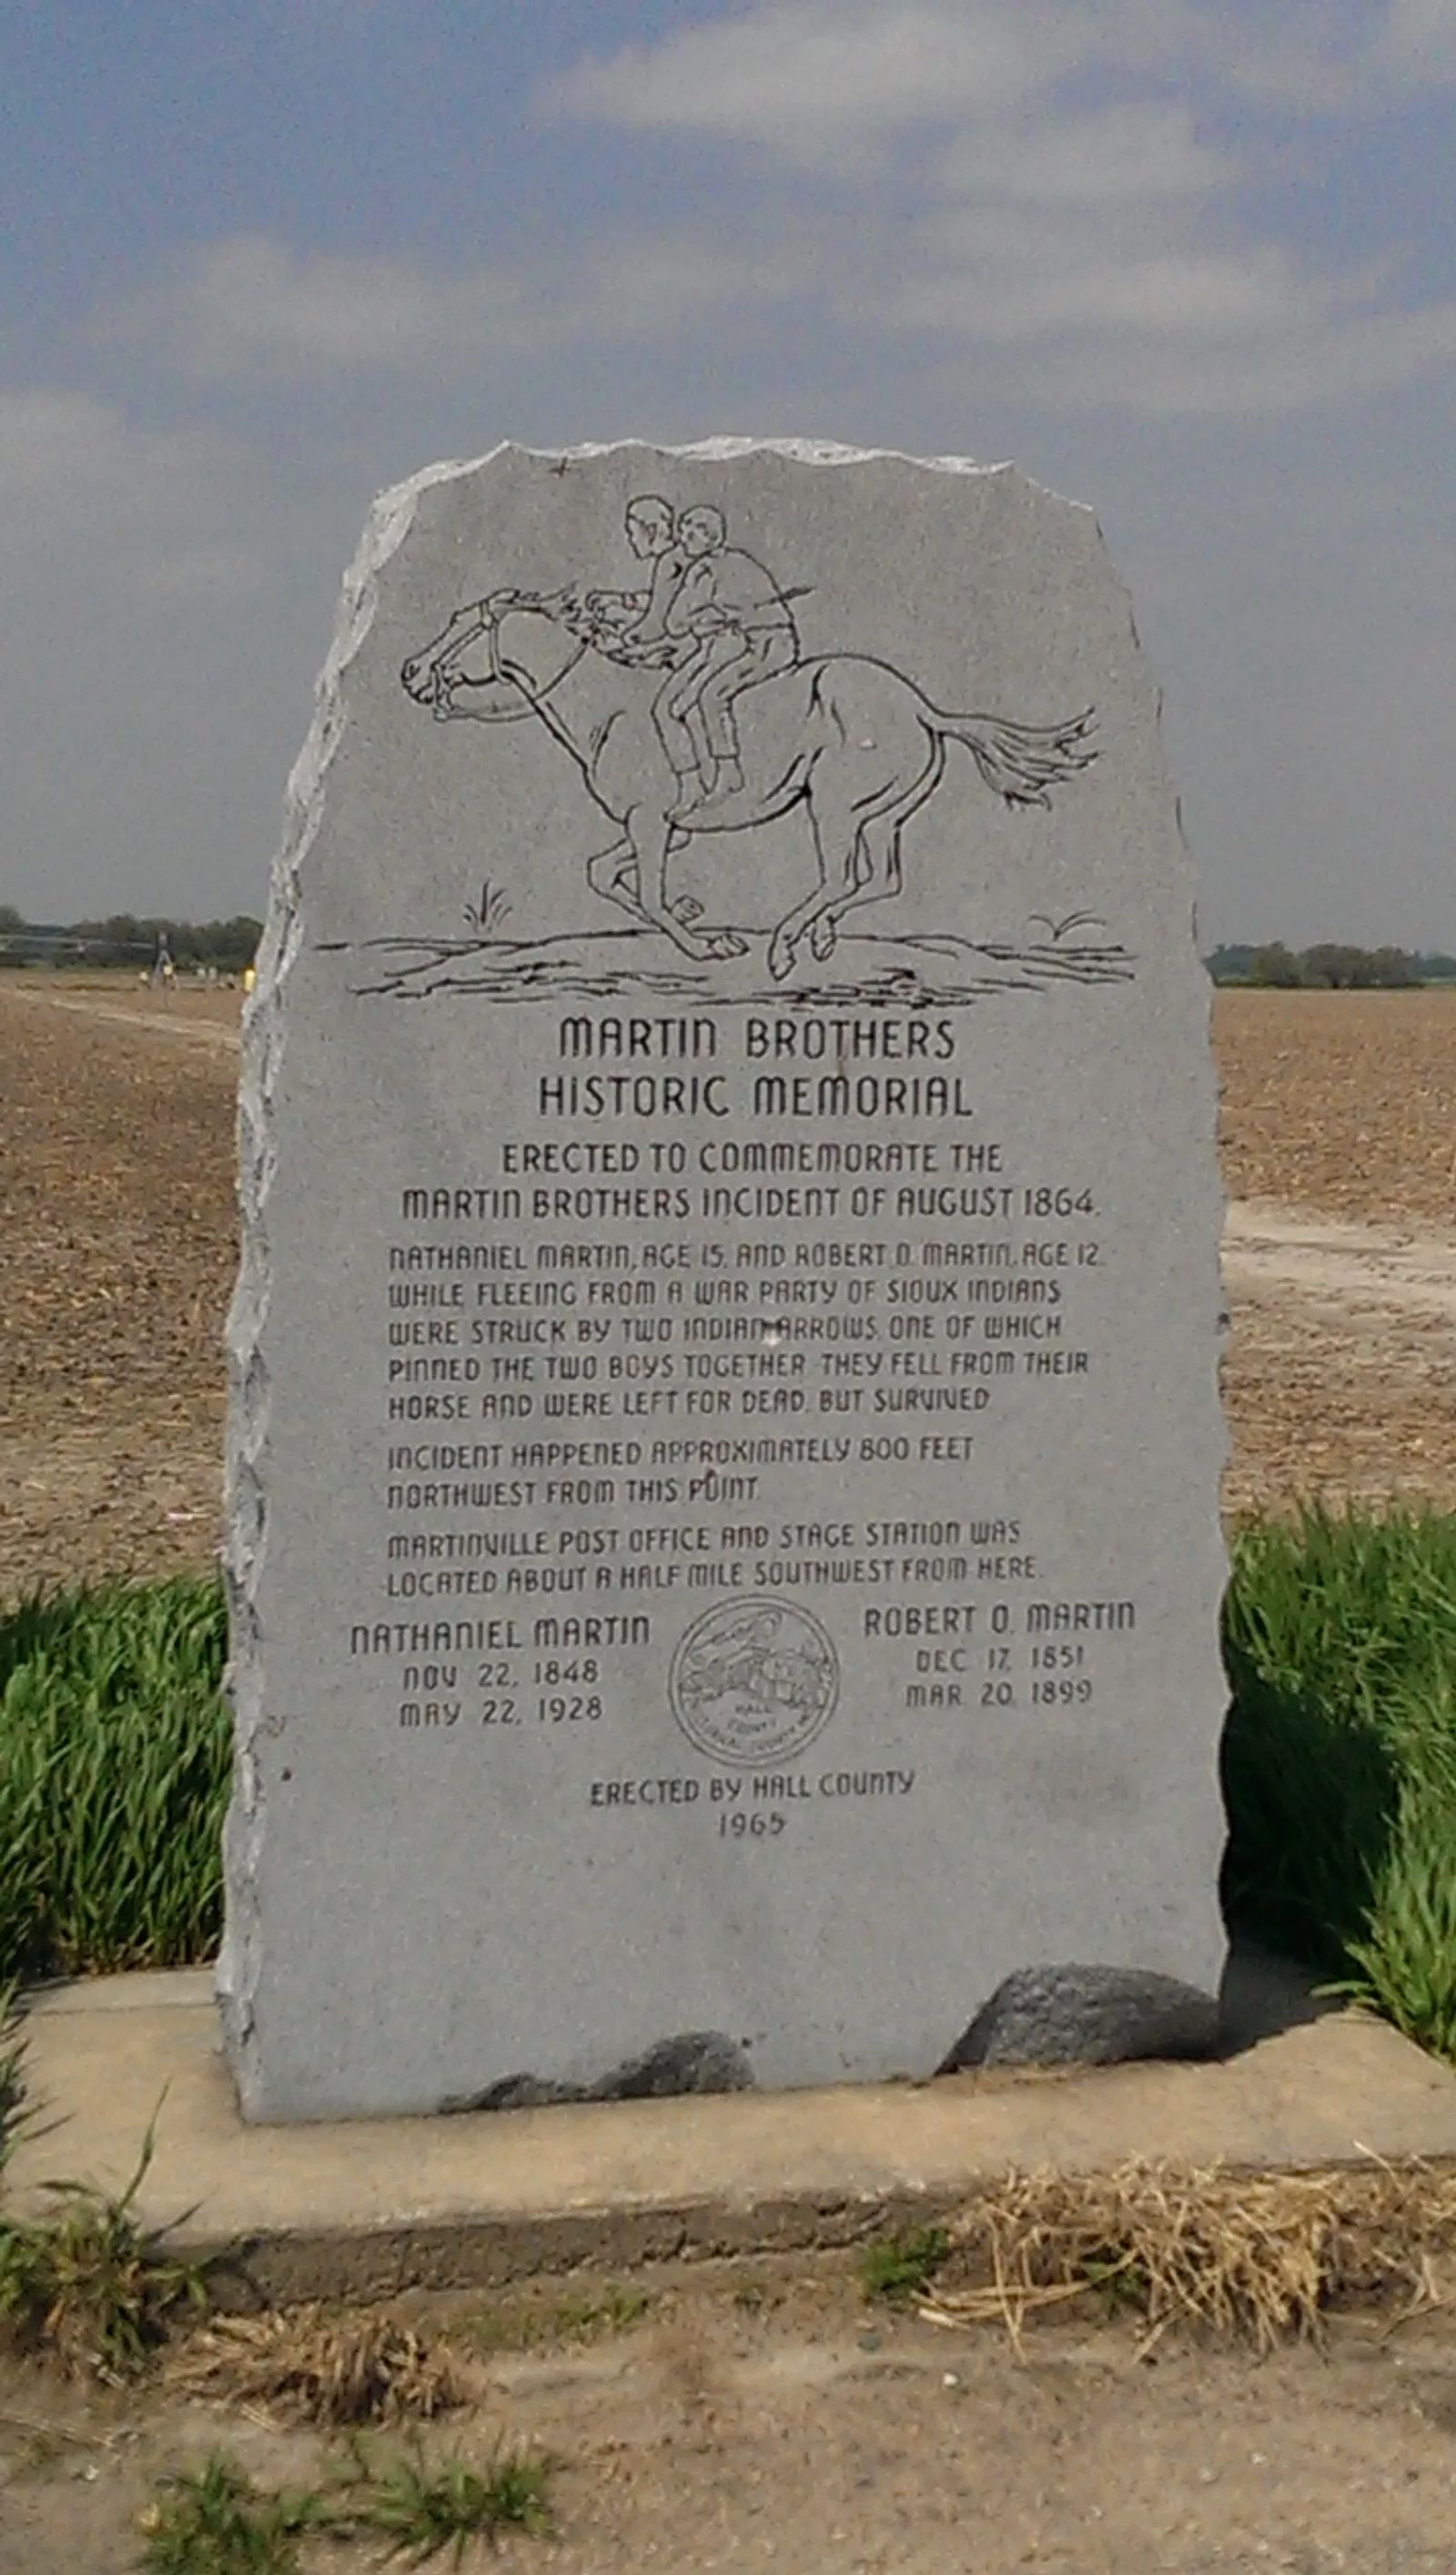 A marker near the location of the Martin Brothers "Incident" near Hastings, Nebraska